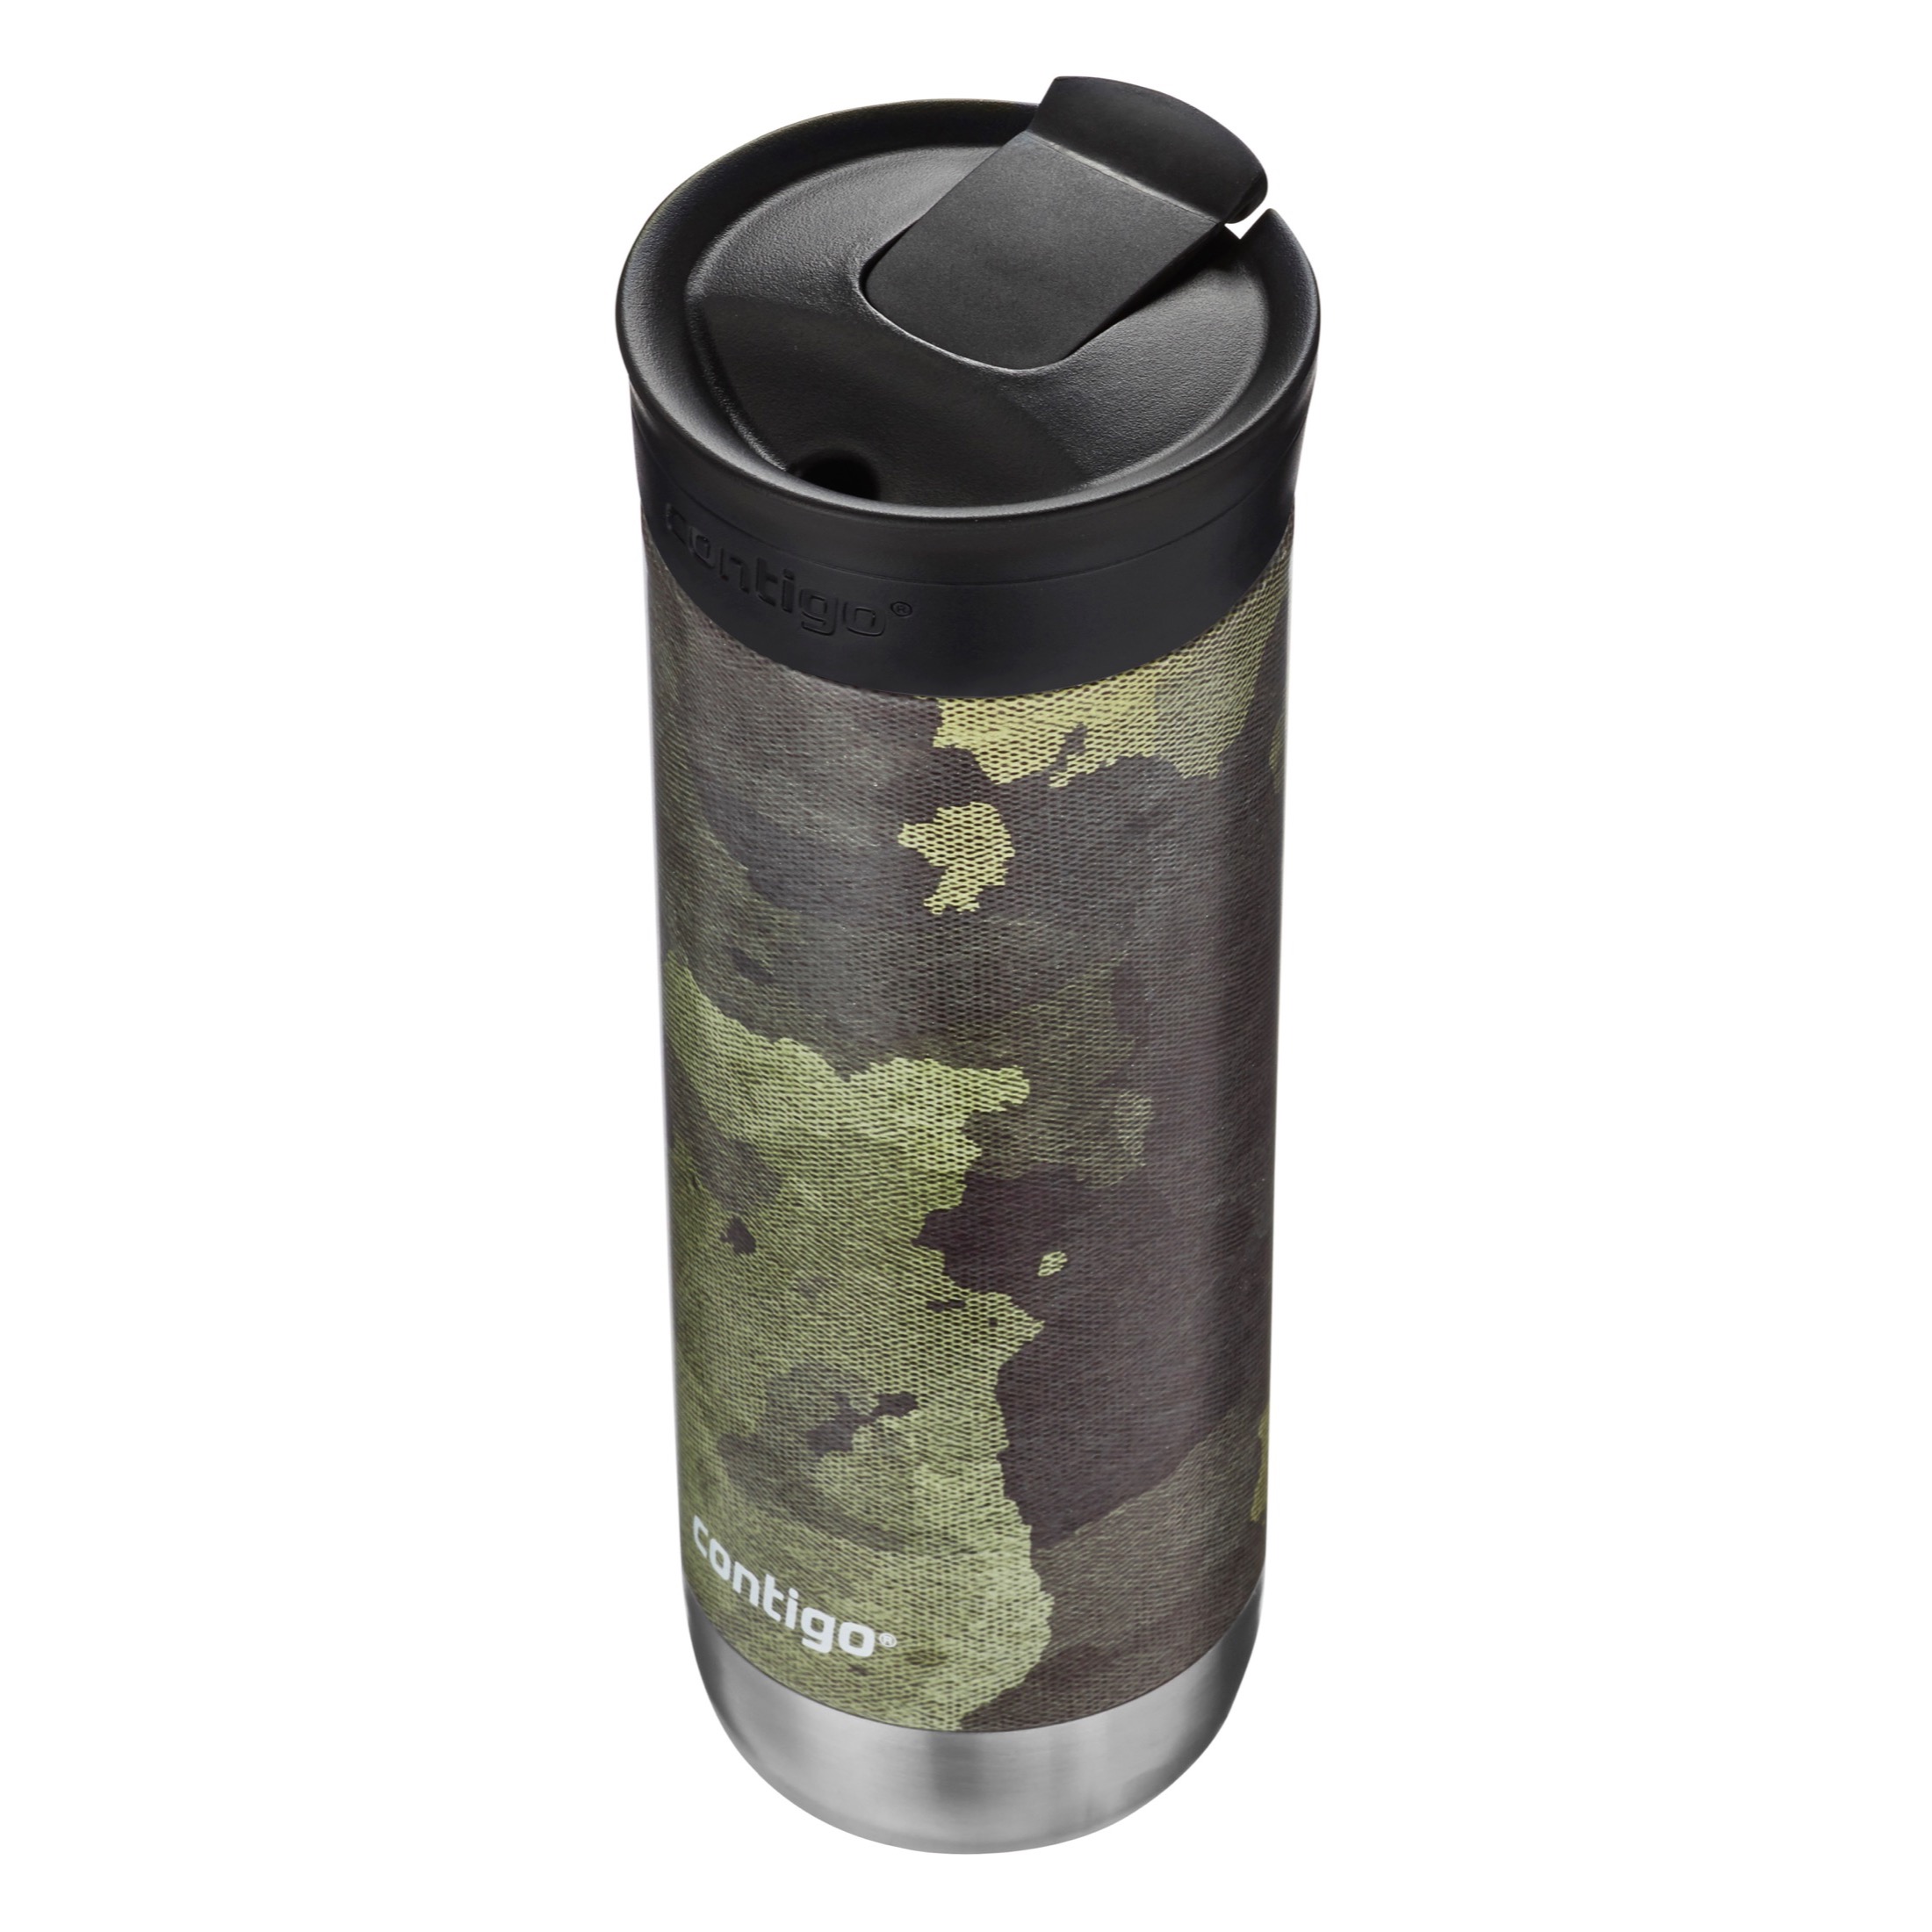 Contigo Couture Stainless Steel Travel Mug with SNAPSEAL Lid Camouflage, 20 fl oz. - image 2 of 2